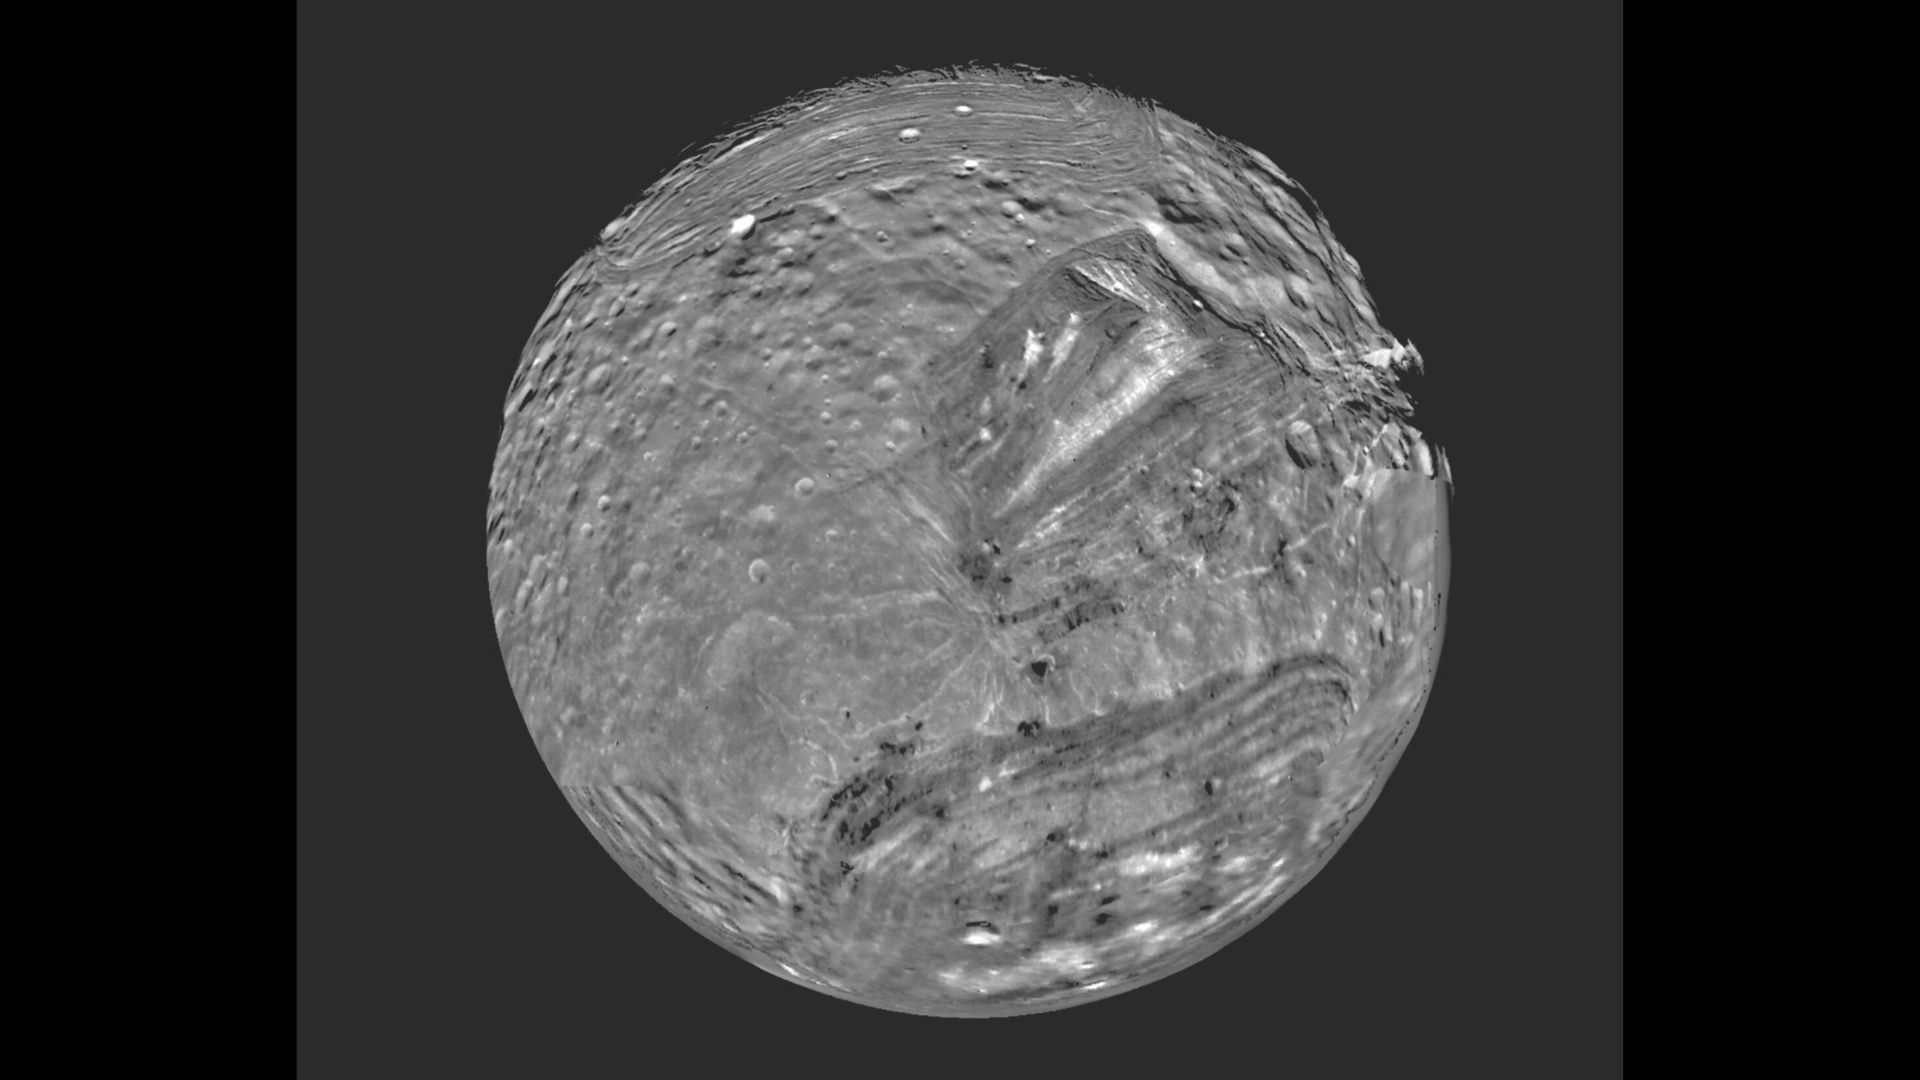 Voyager 2's 1986 image of Miranda, a moon of Uranus named after Shakespeare's daughter Prospero "storm."